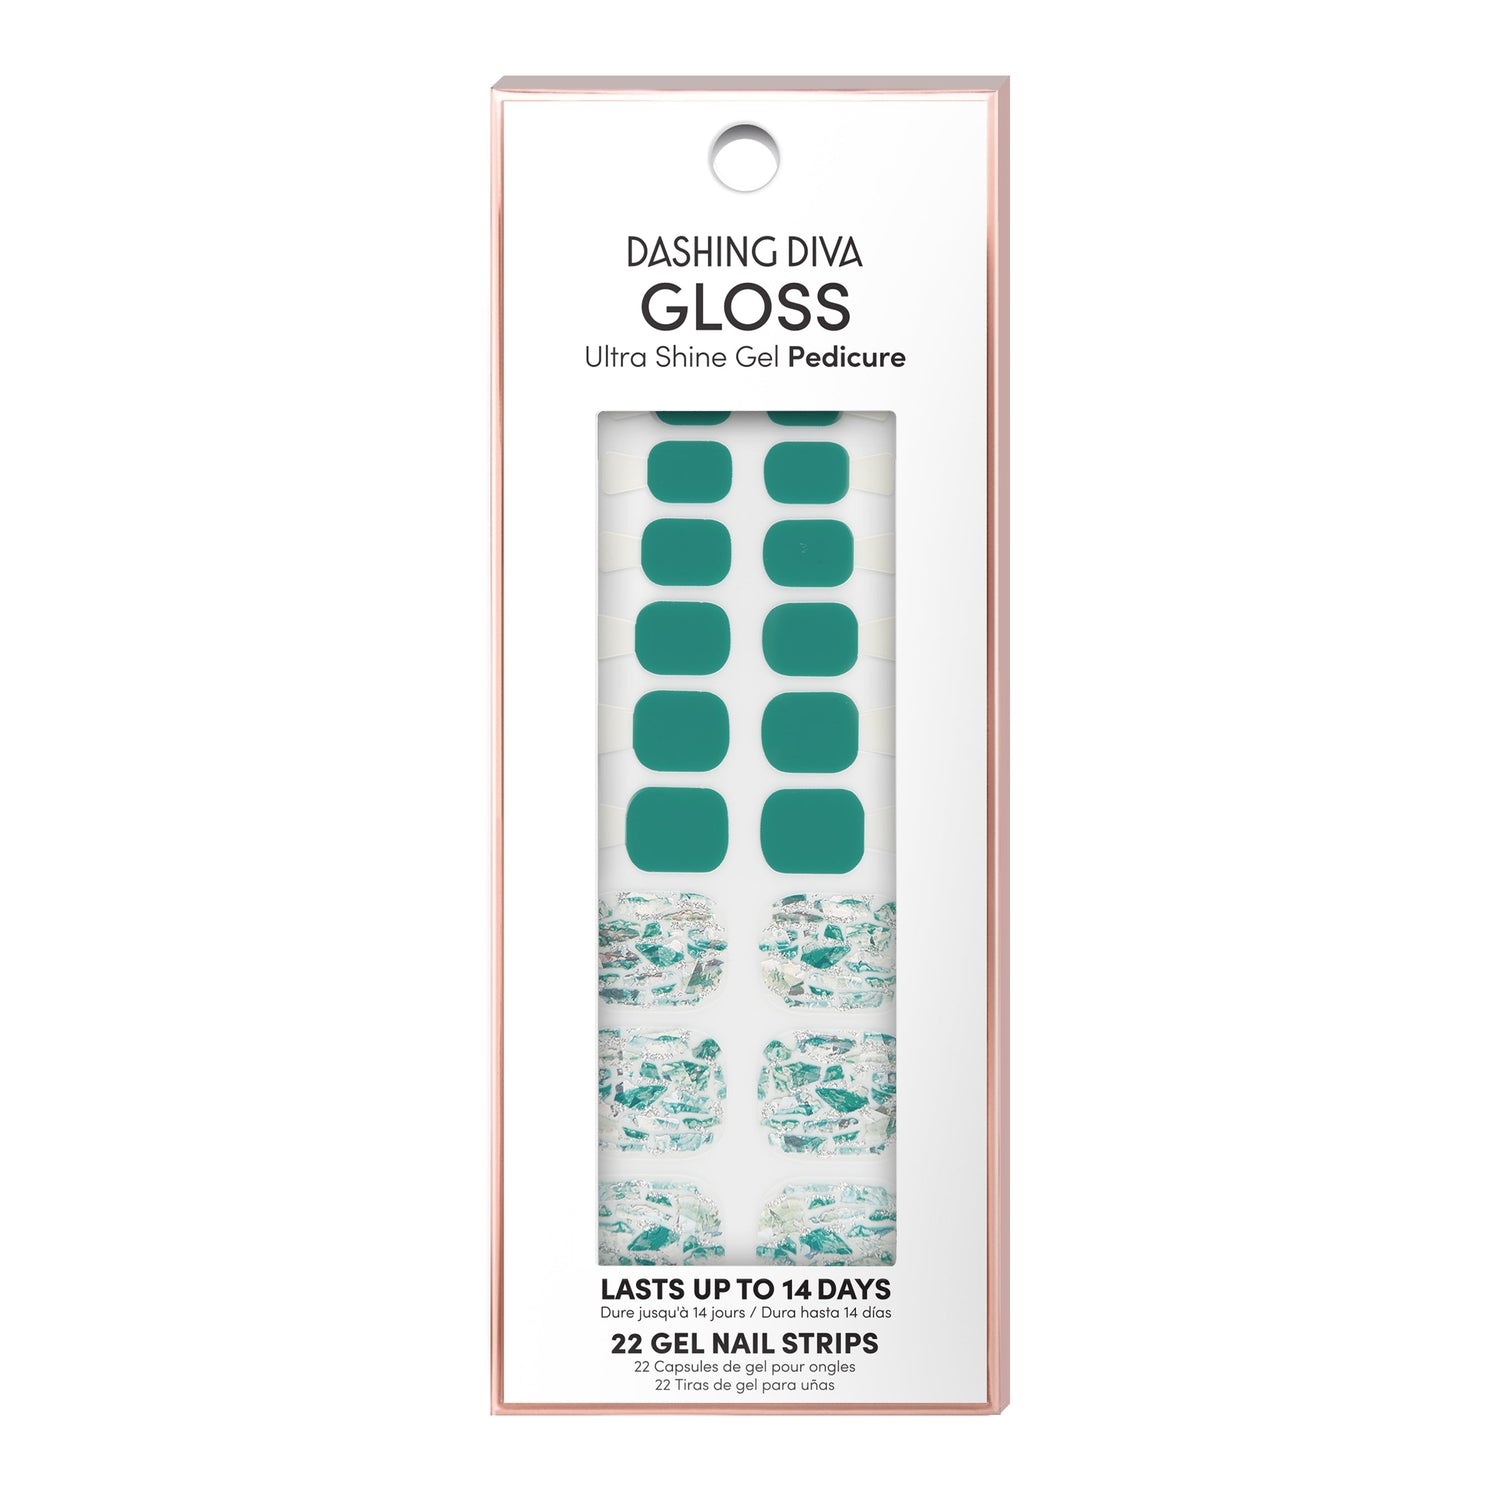 Dashing Diva GLOSS Pedicure emerald green gel pedi strips with shattered glass accents.